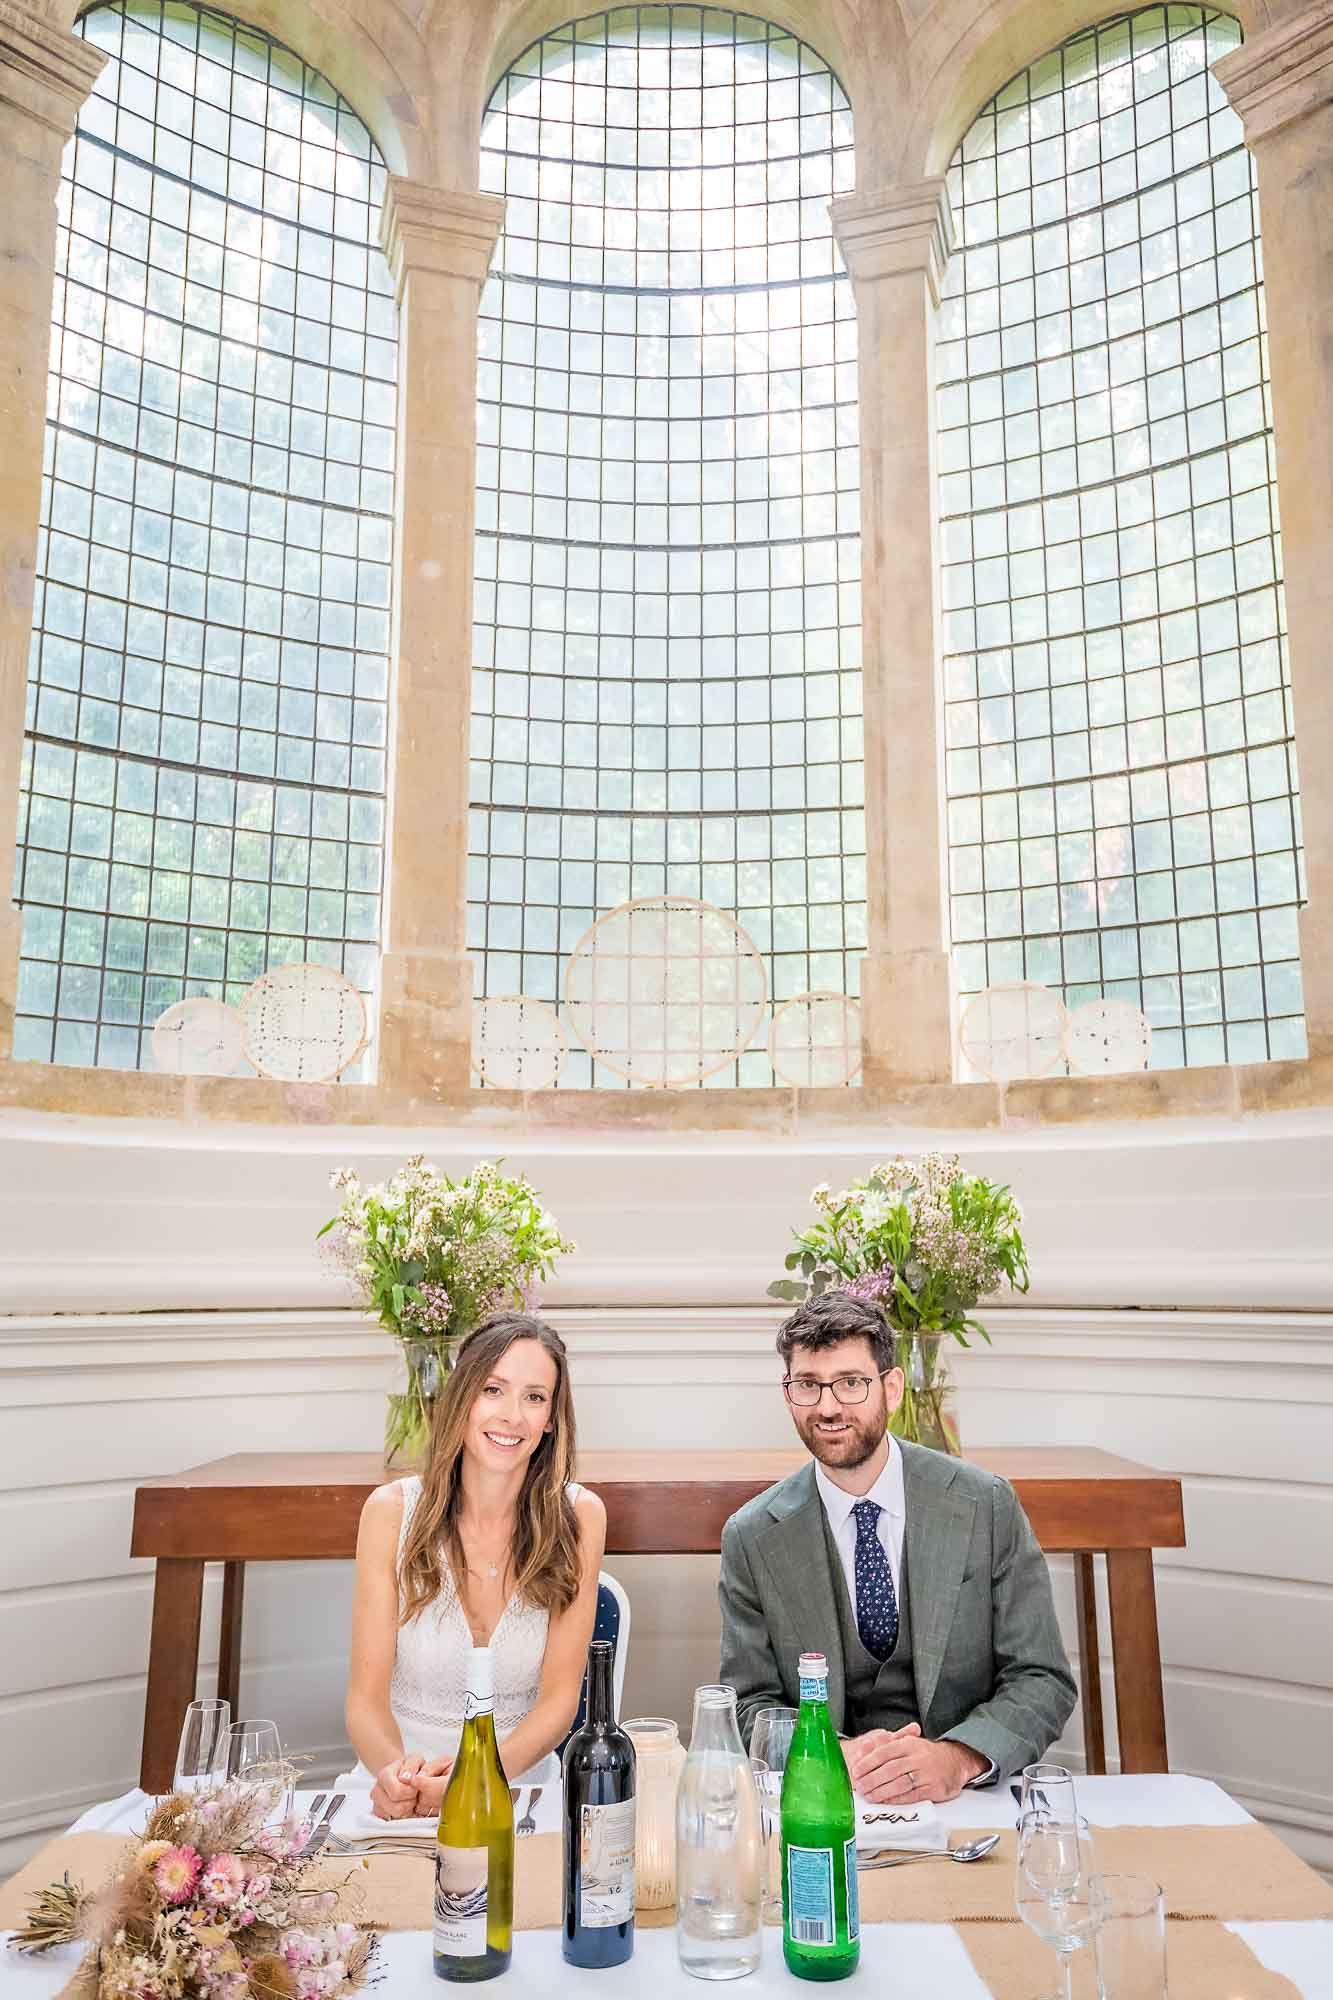 Bride and groom seated at table in the Anglican Chapel, Arnos Vale for their wedding breakfast